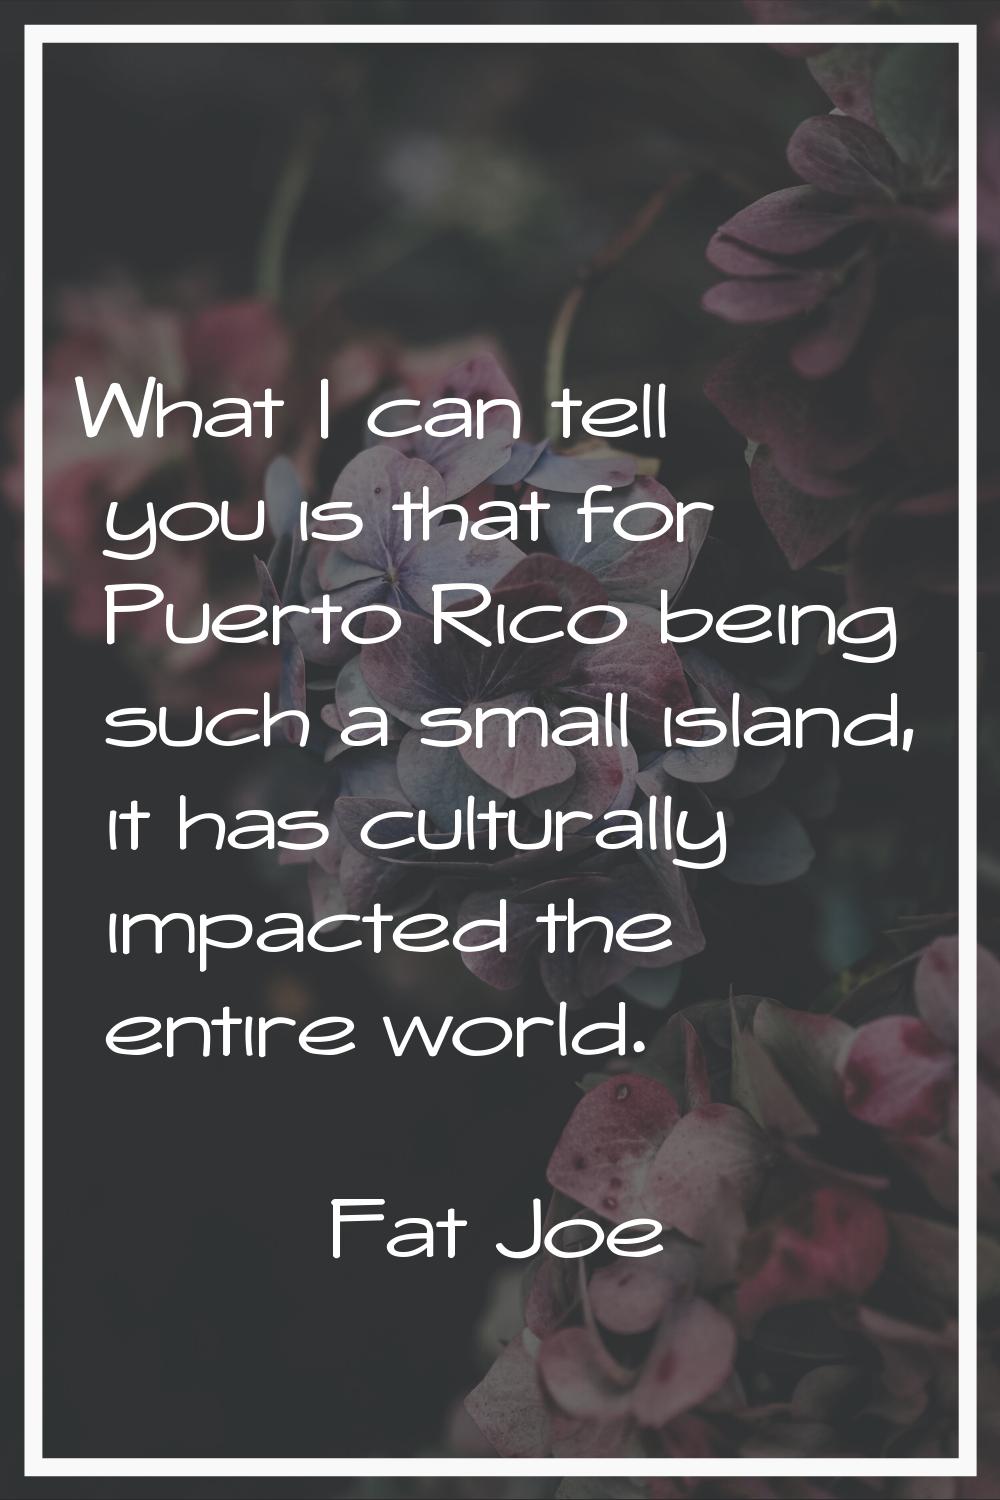 What I can tell you is that for Puerto Rico being such a small island, it has culturally impacted t